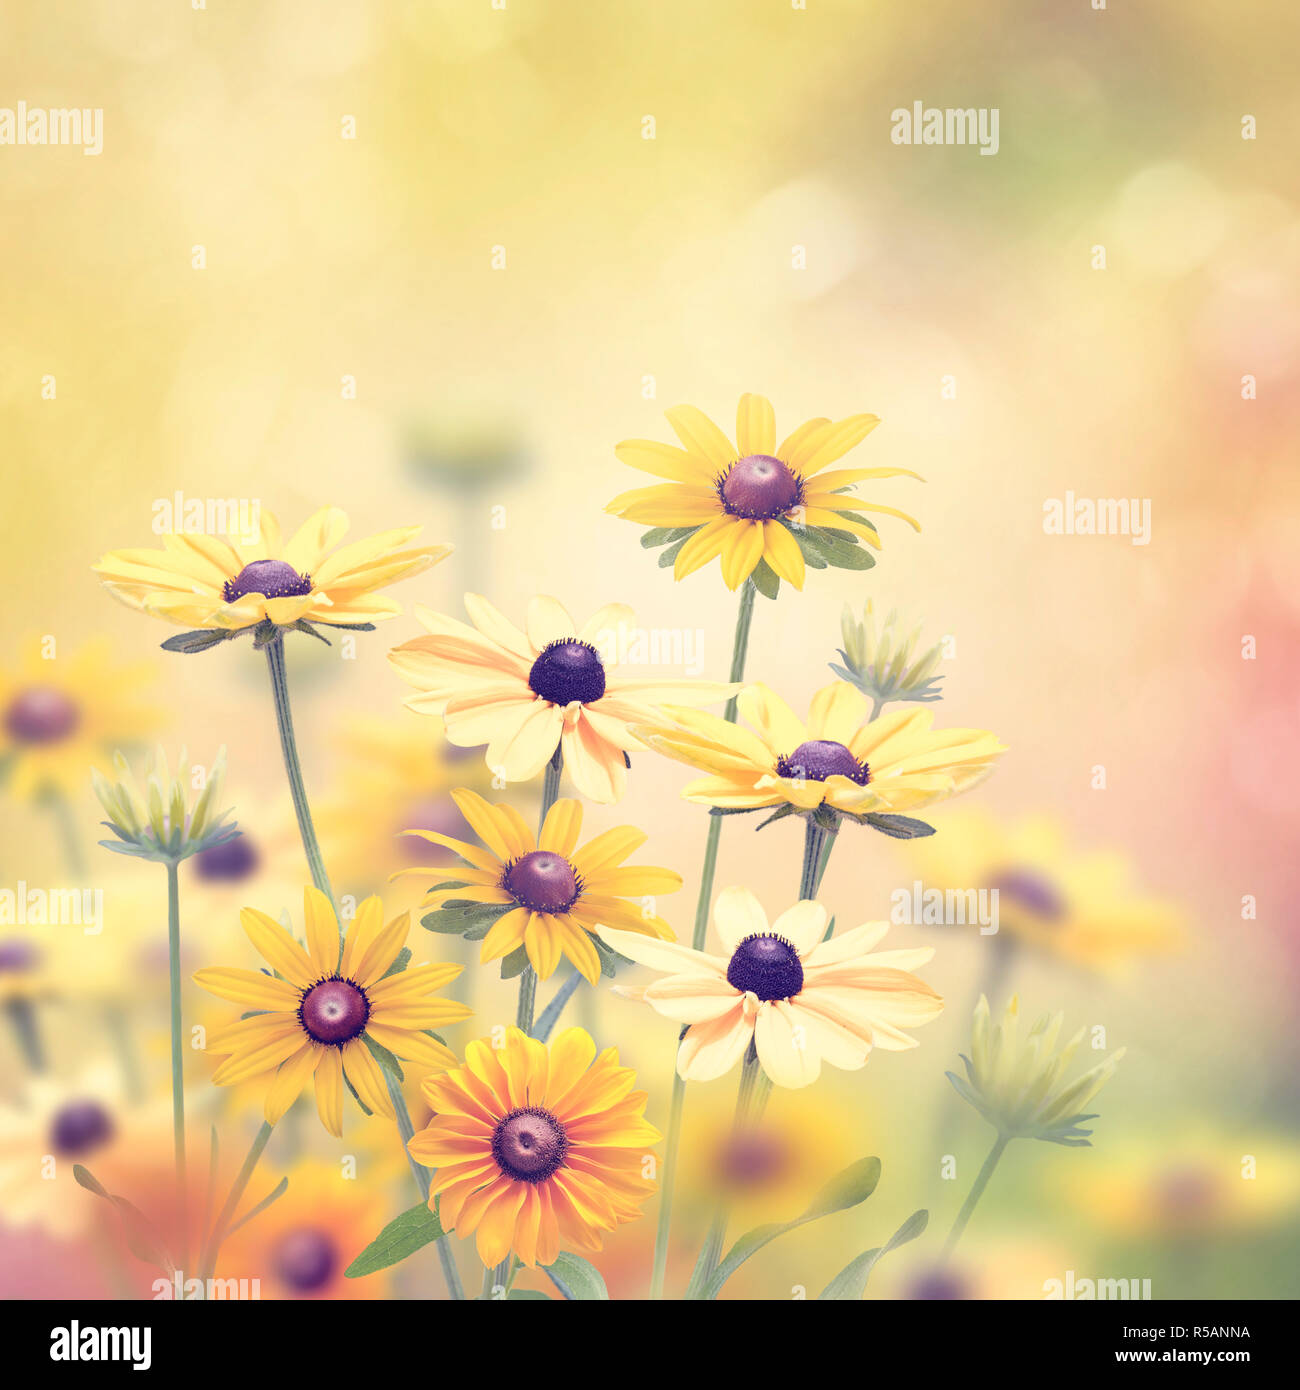 Yellow Flowers Background R5ANNA 